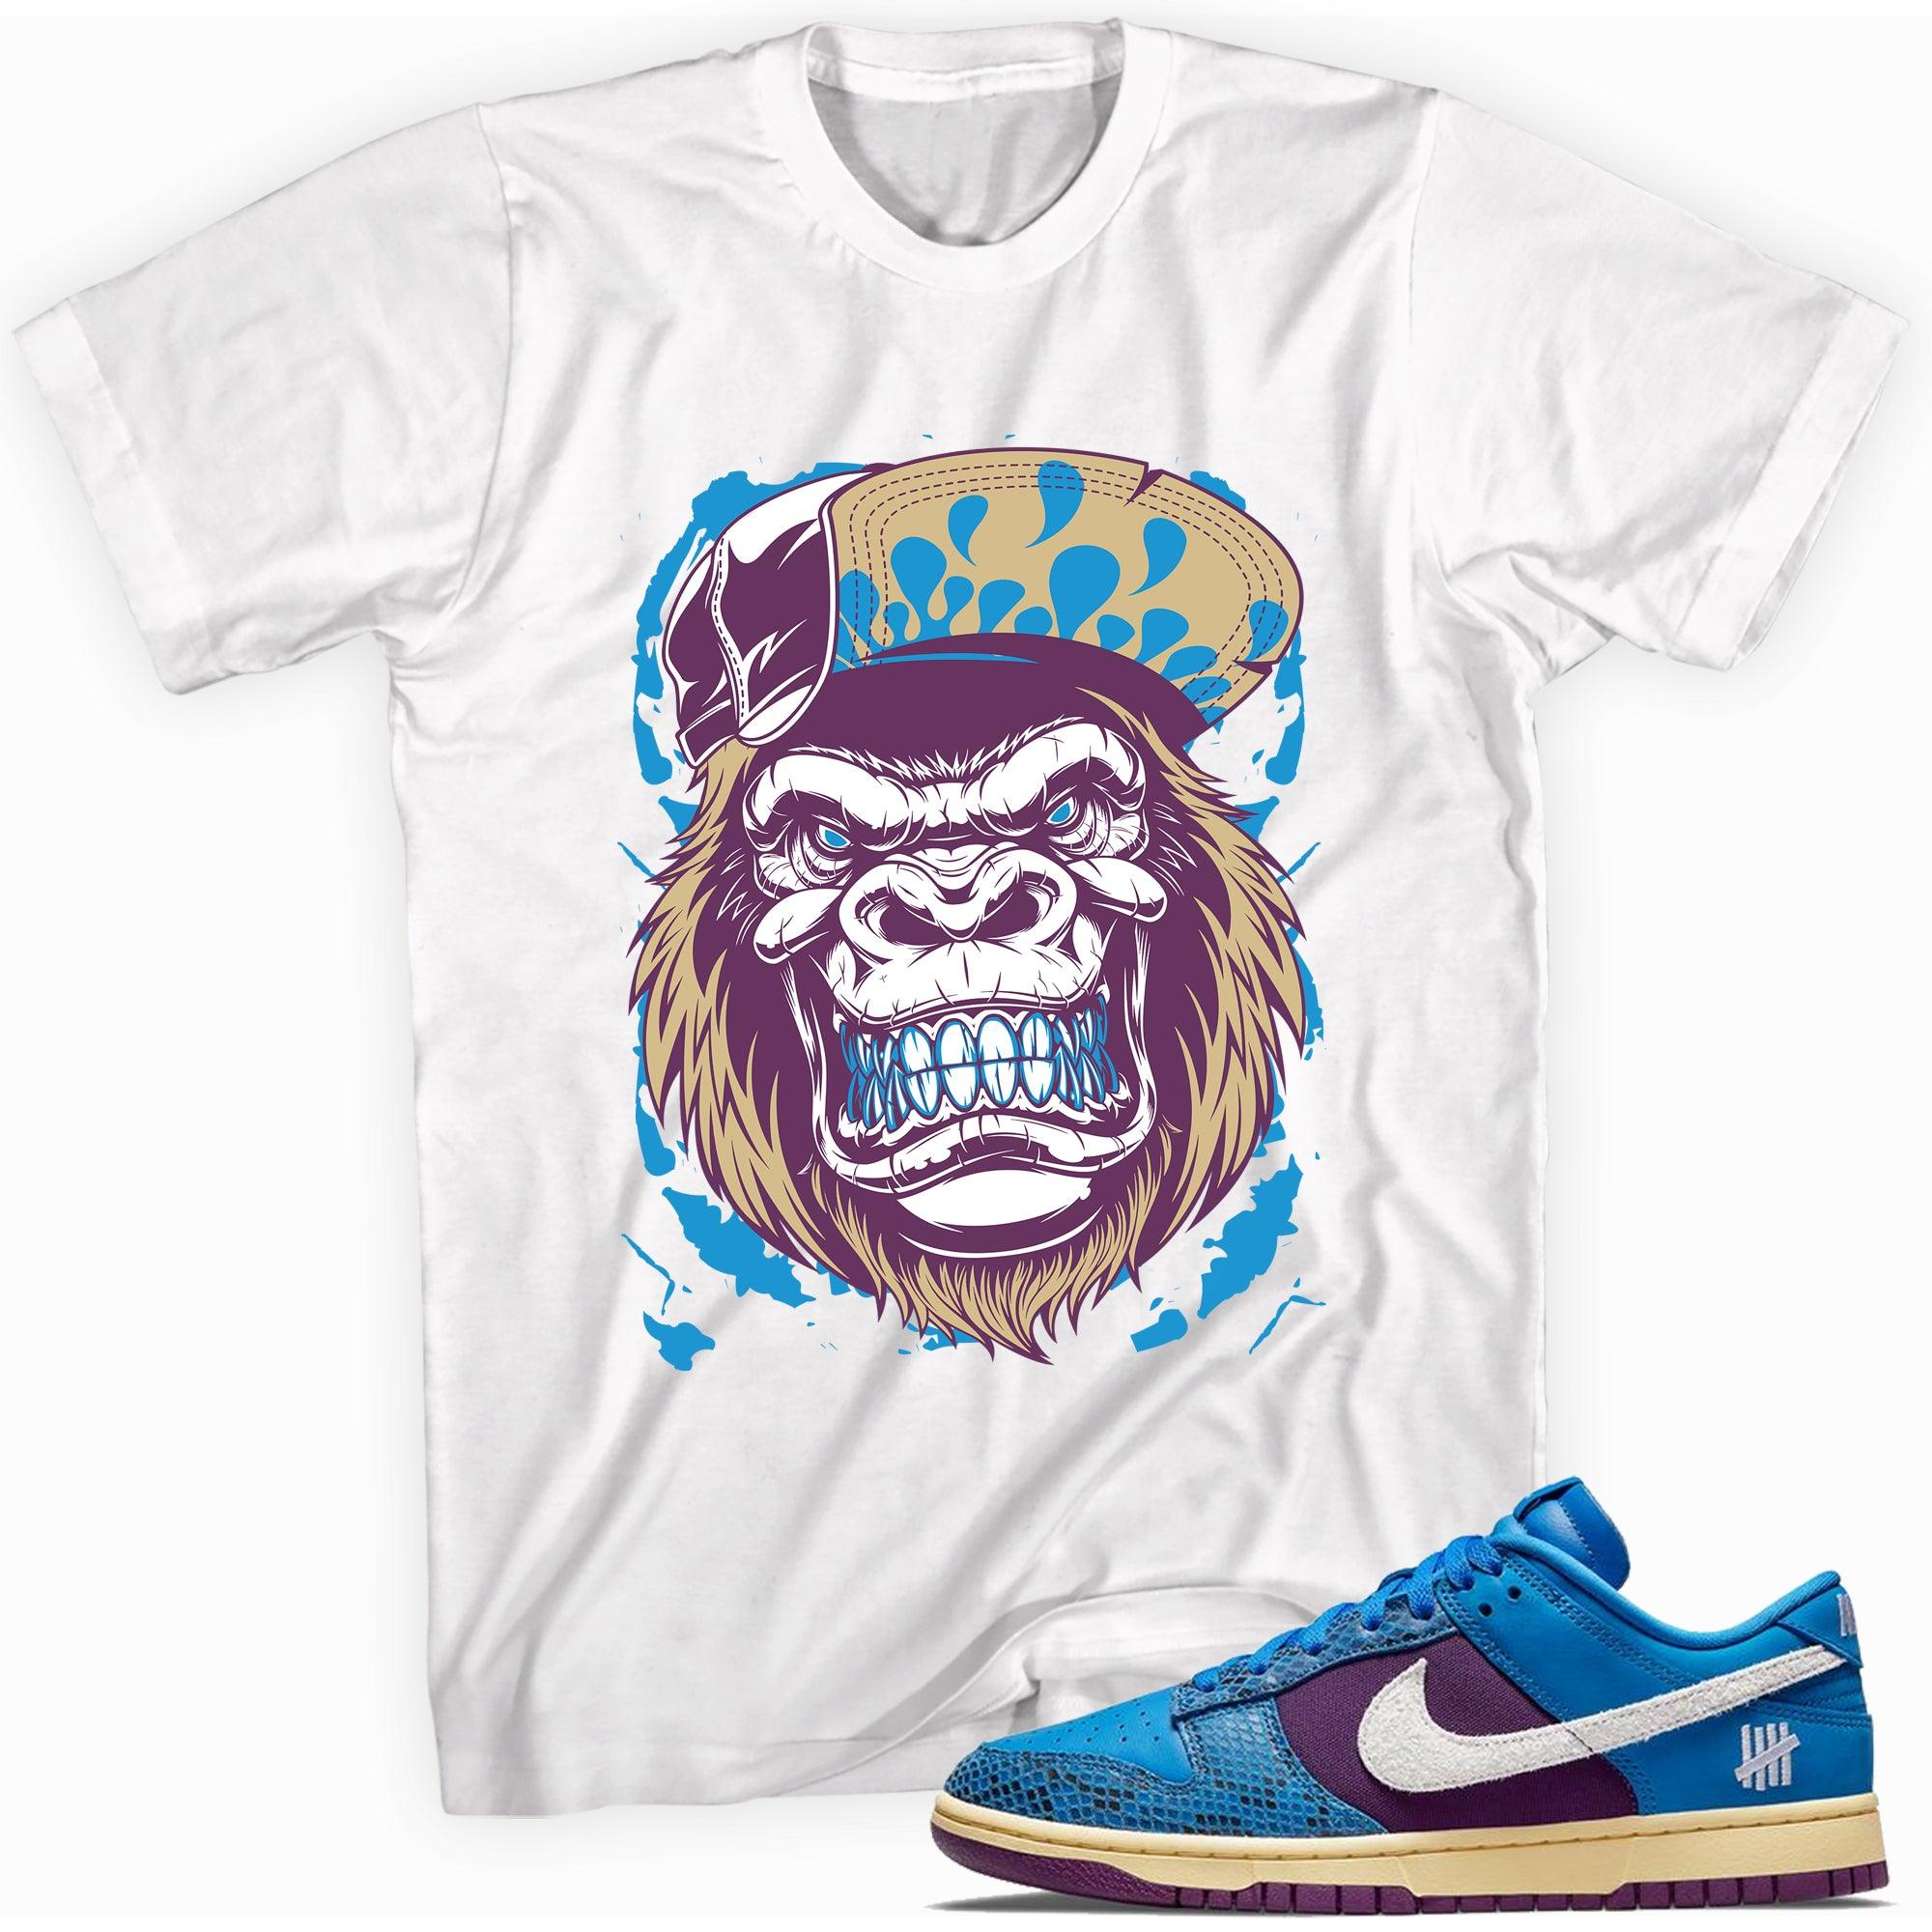 Gorilla Beast Shirt Nike Dunk Low Undefeated 5 On It Dunk vs AF1 photo